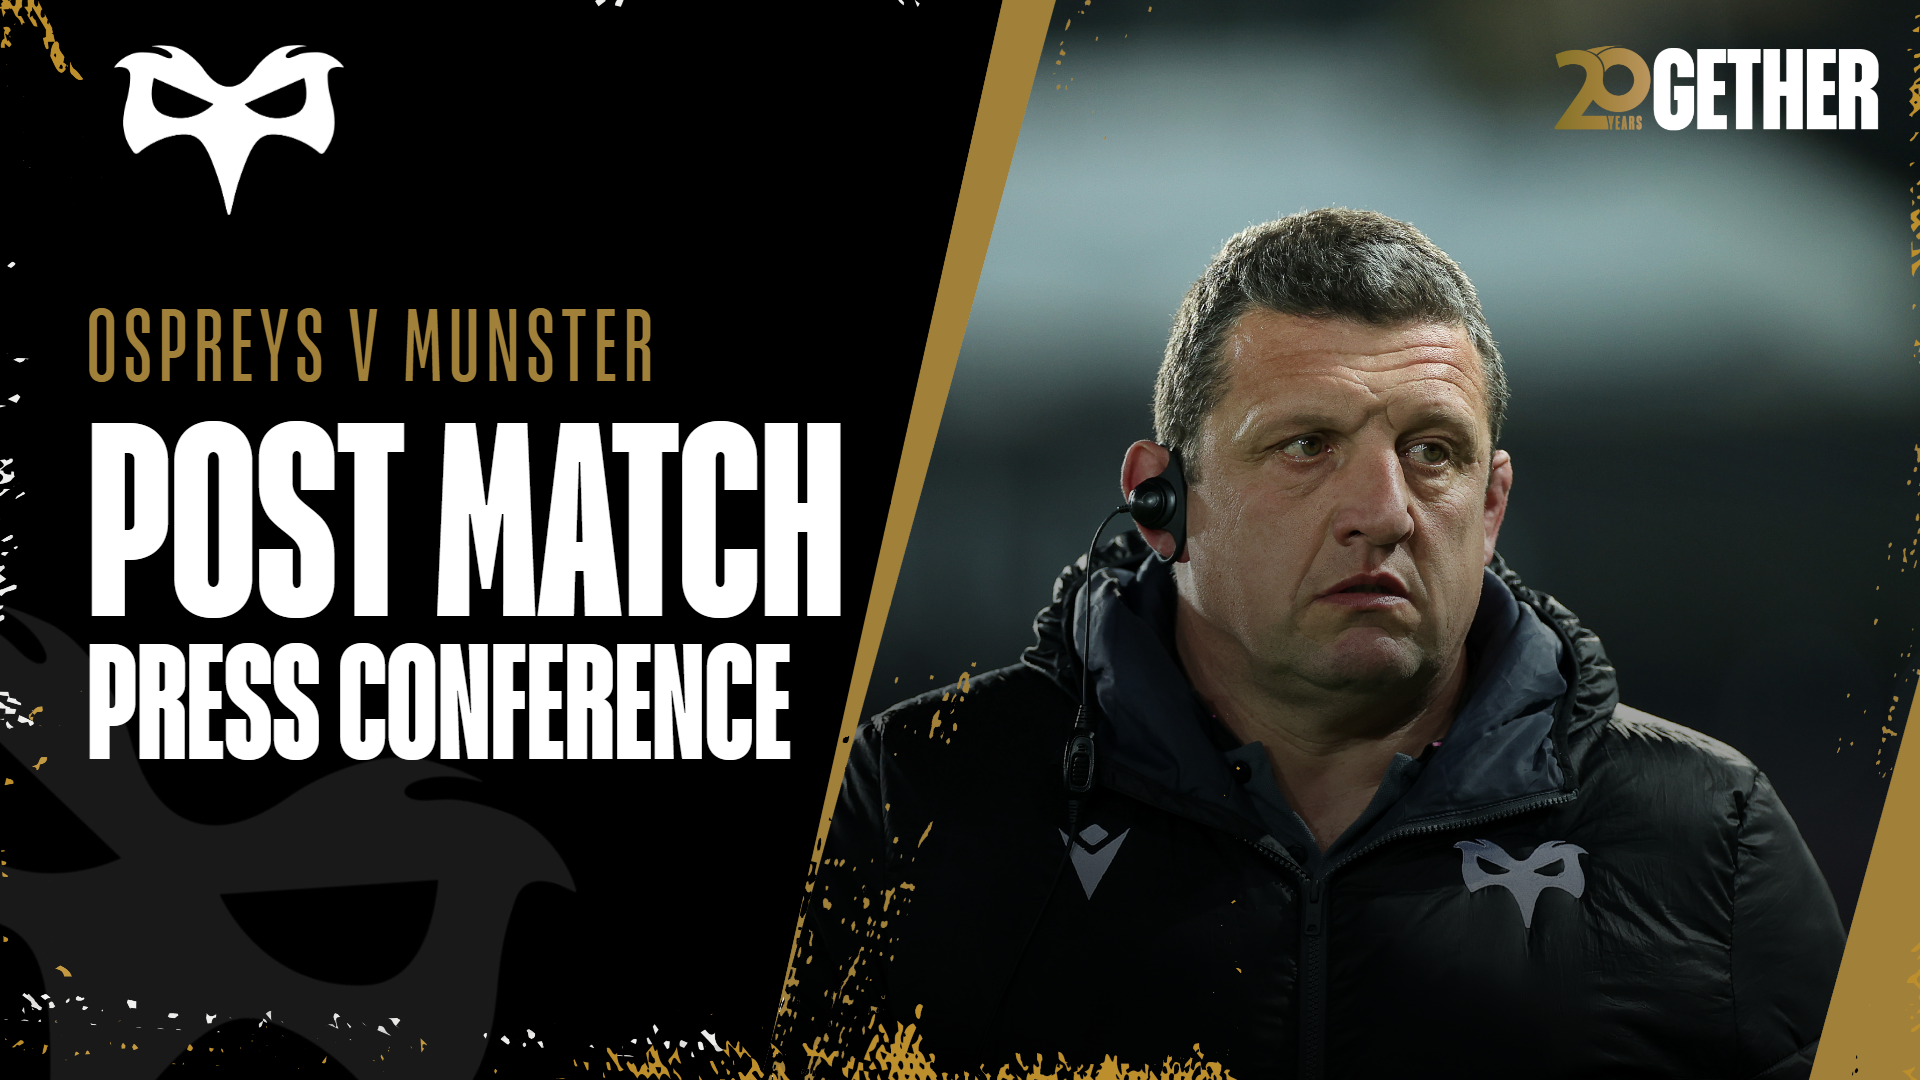 Post Match Press Conference: Toby Booth (Vs Munster)